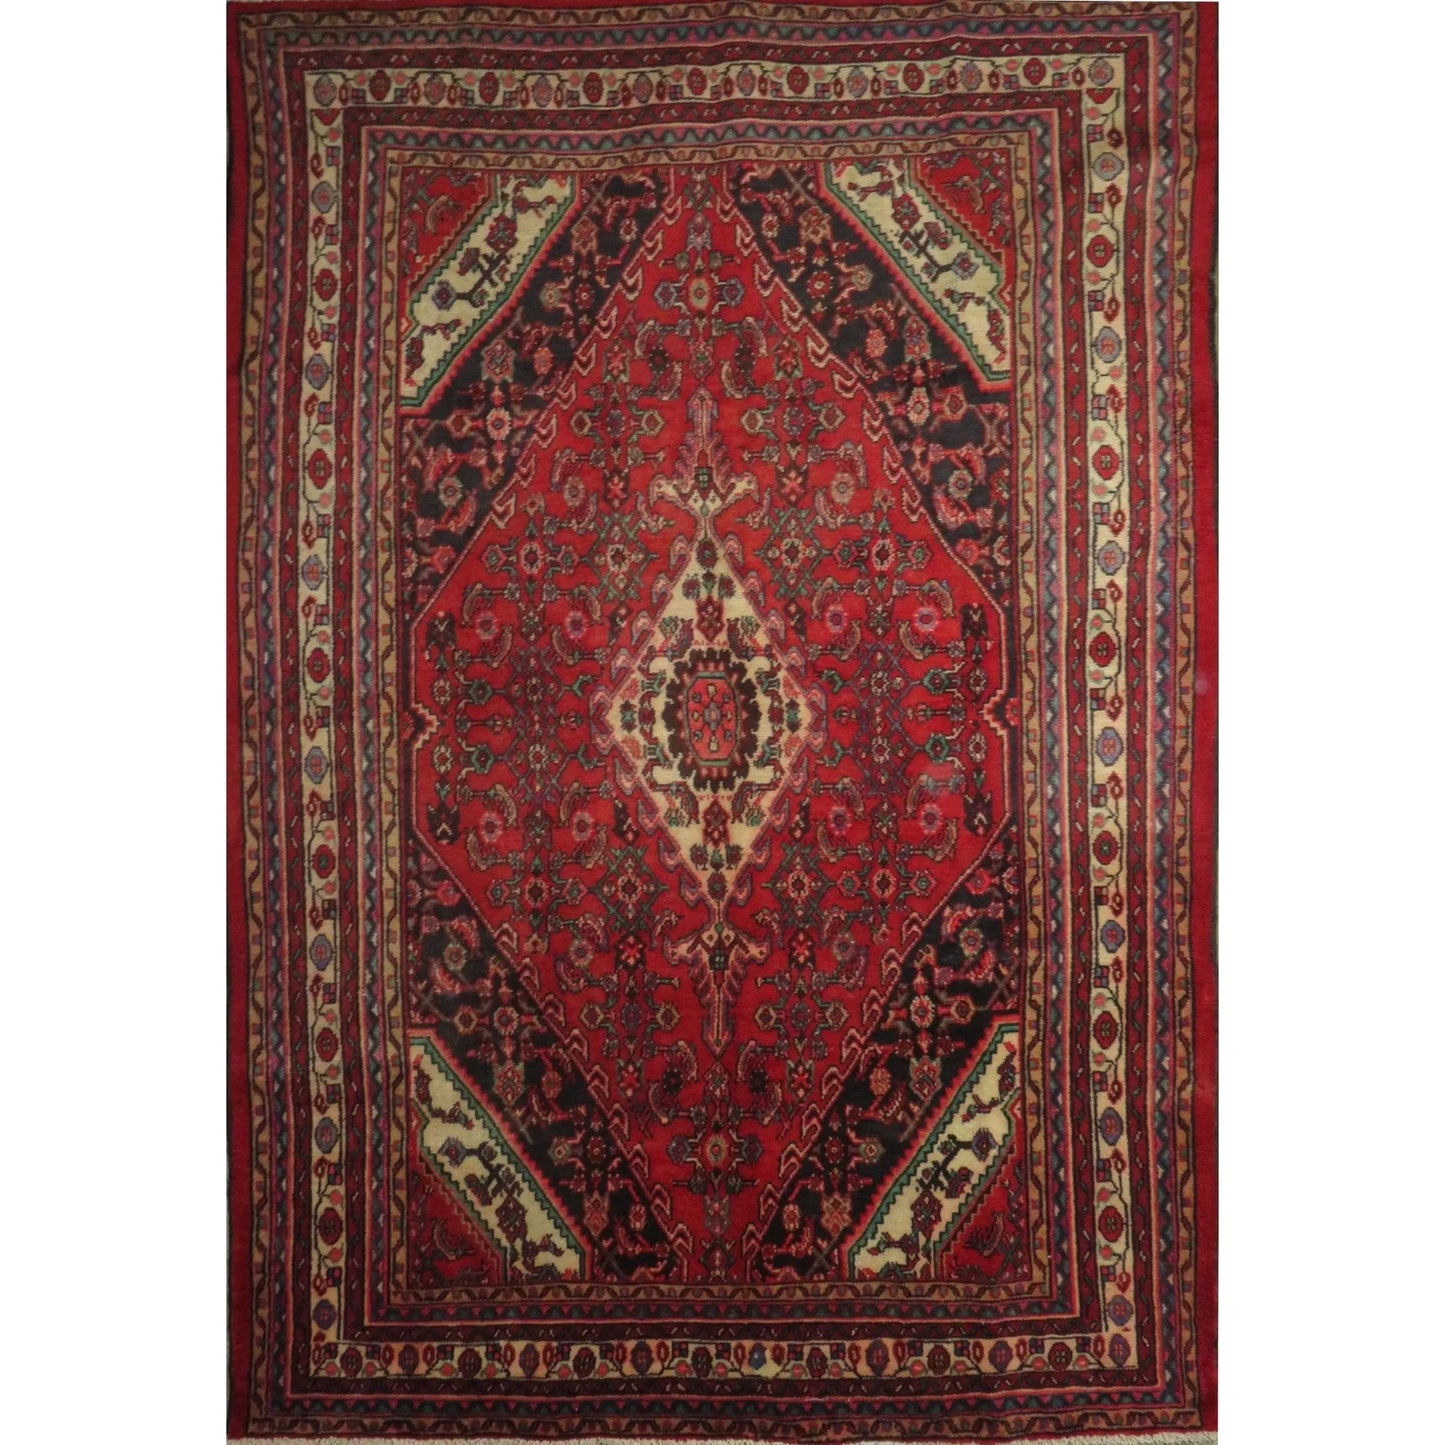 Hand-Knotted Persian Wool Rug _ Luxurious Vintage Design, 10'2" x 6'6", Artisan Crafted